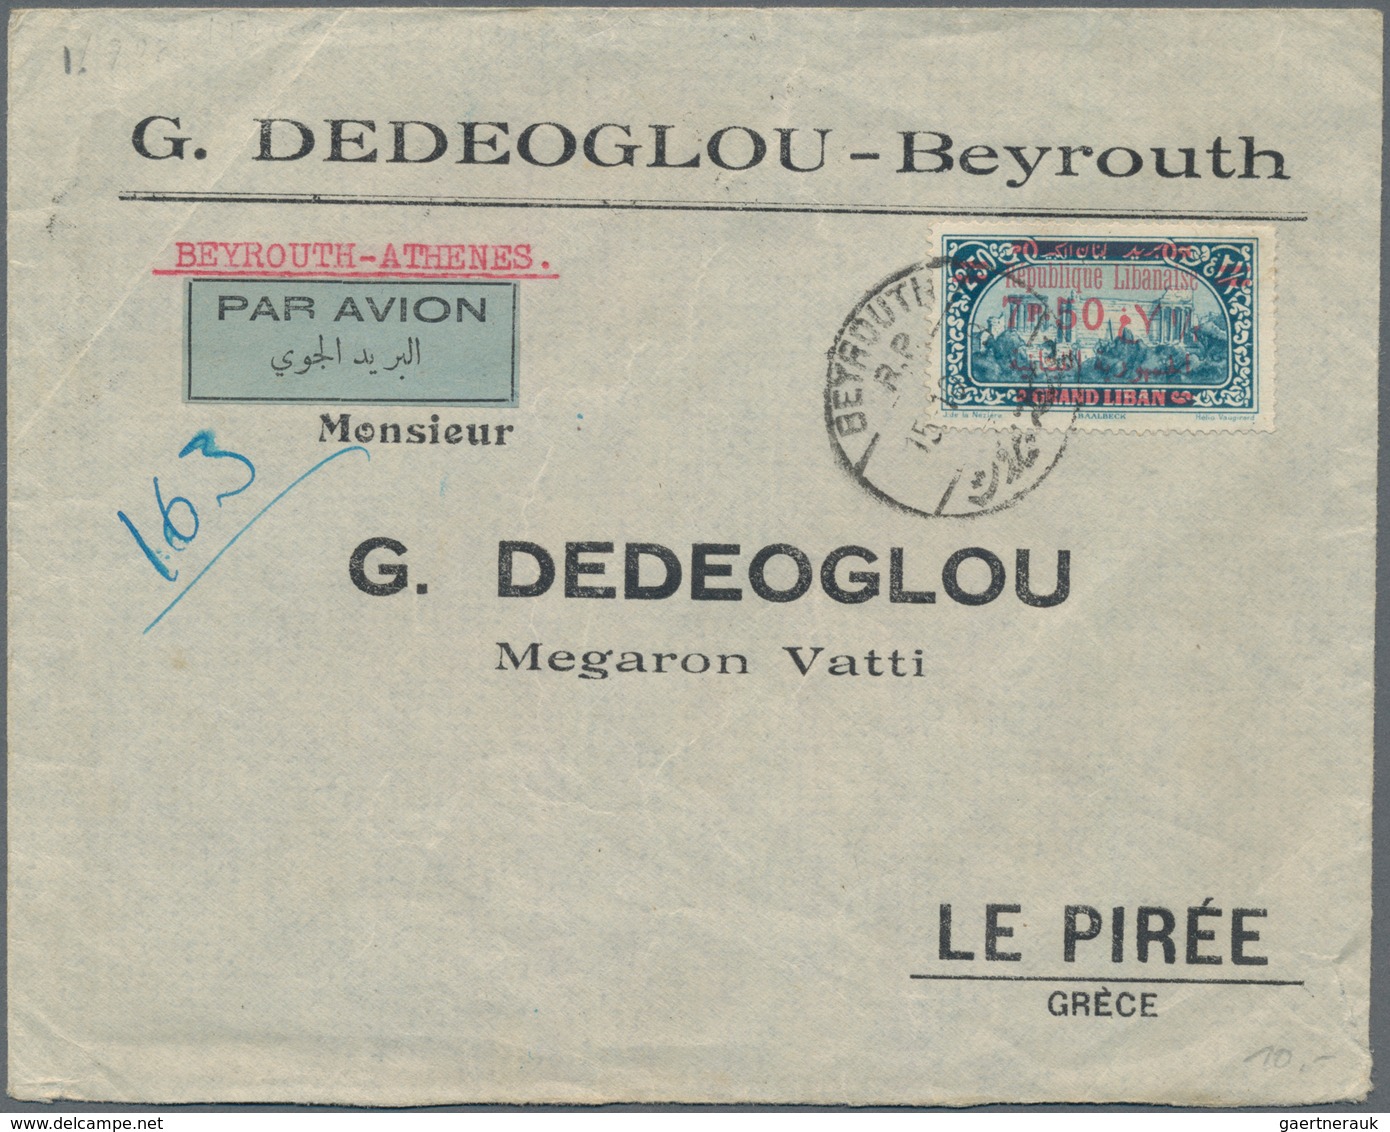 Libanon: 1929 Airmail Cover From Beyrouth To Piraeus, Greece By Beyrouth-Athens Flight, Franked On F - Lebanon